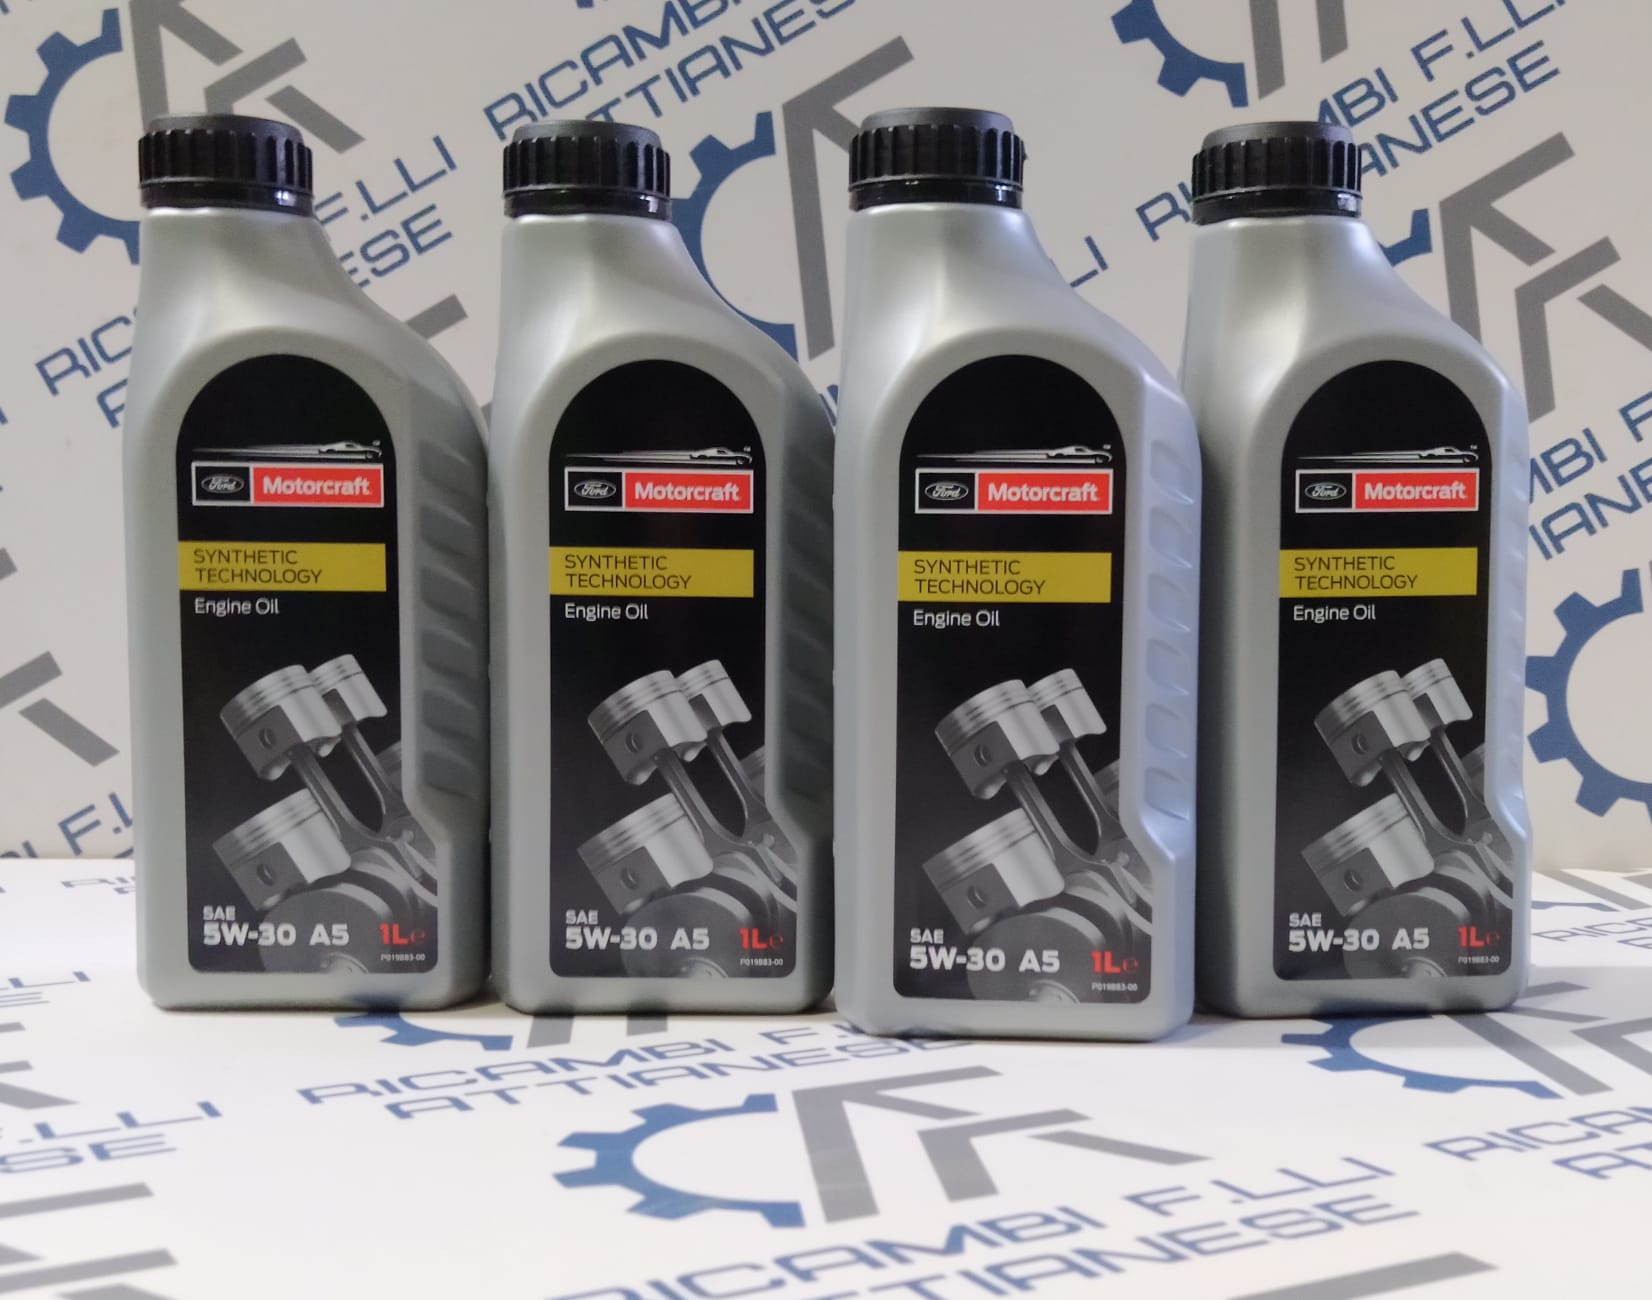 4LT Olio motore Ford/Motorcraft 5w30 A5 Synthetic Technology